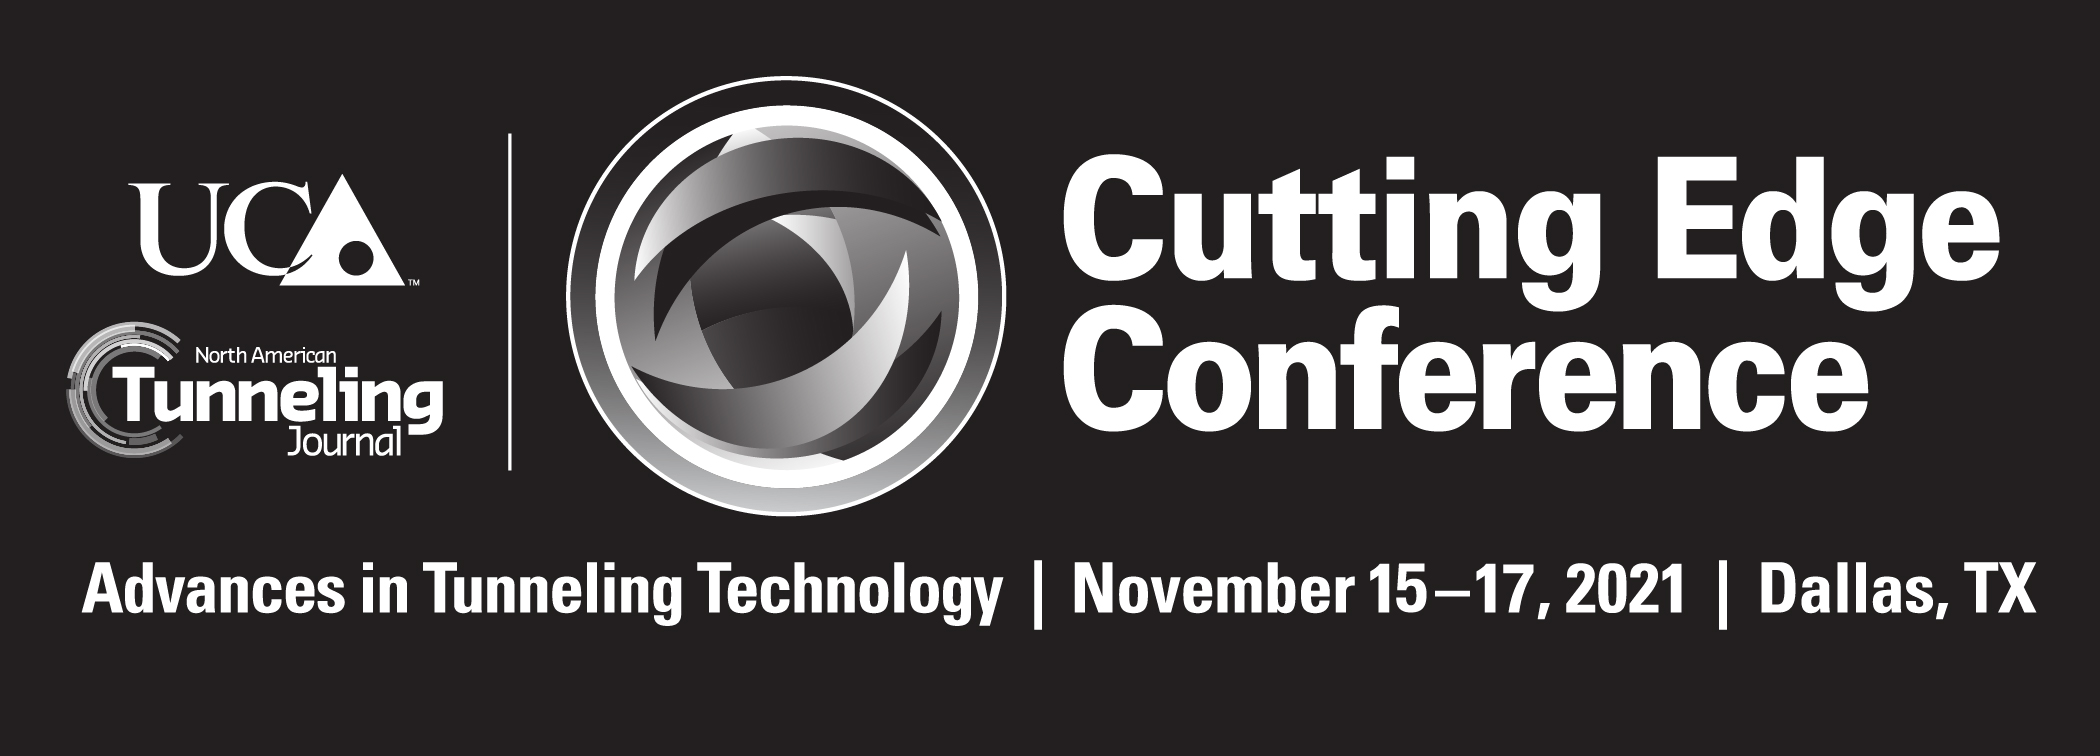 Cutting Edge Conference Logo